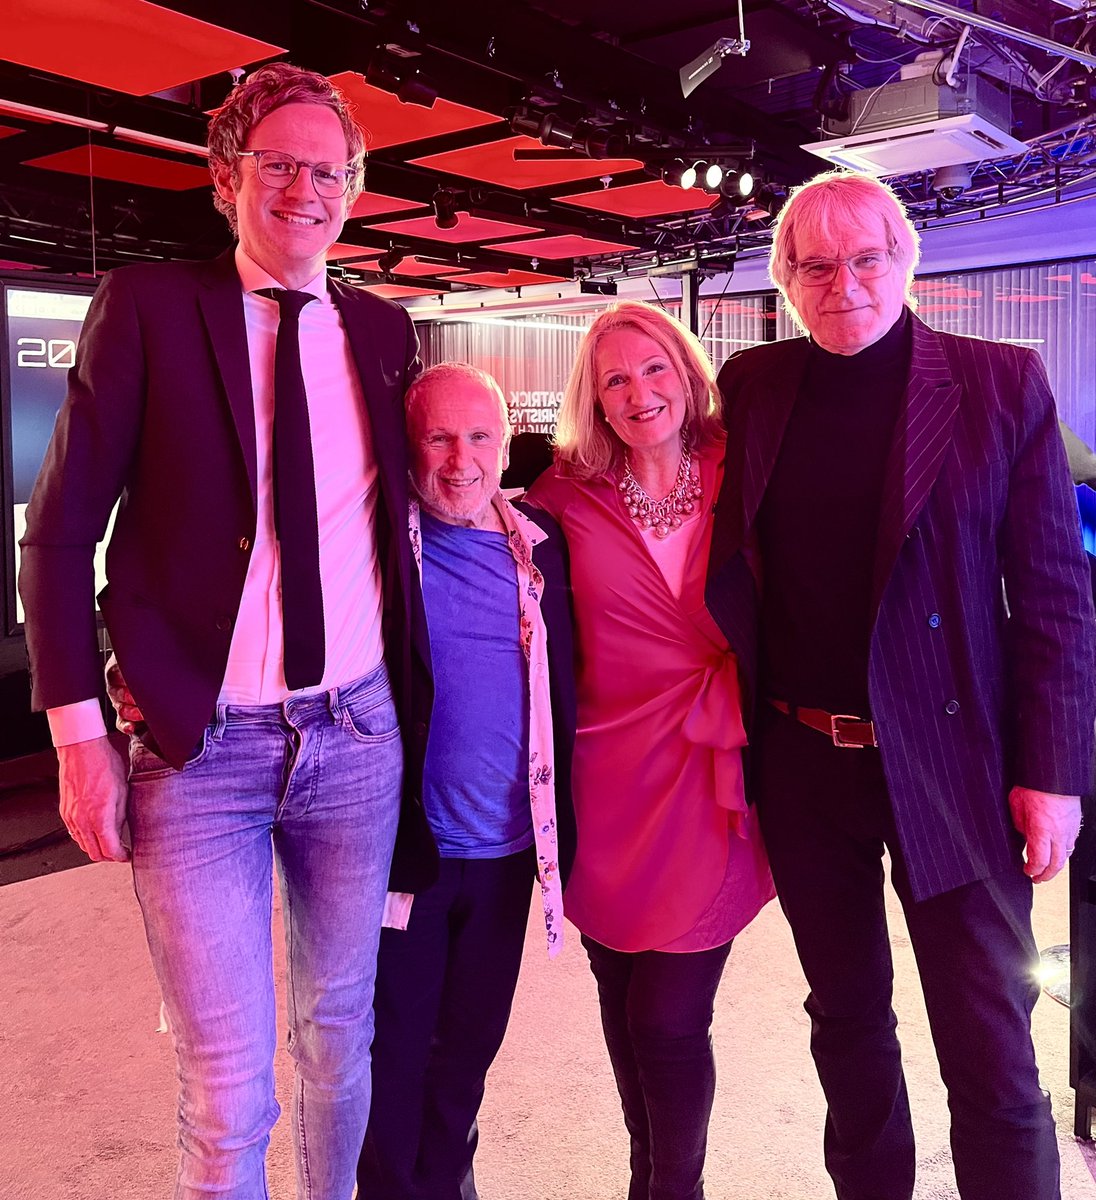 Lovely to join @Wayne_Sleep and Alex Dyke on @mrmarkdolan’s fab @GBNEWS show tonight!